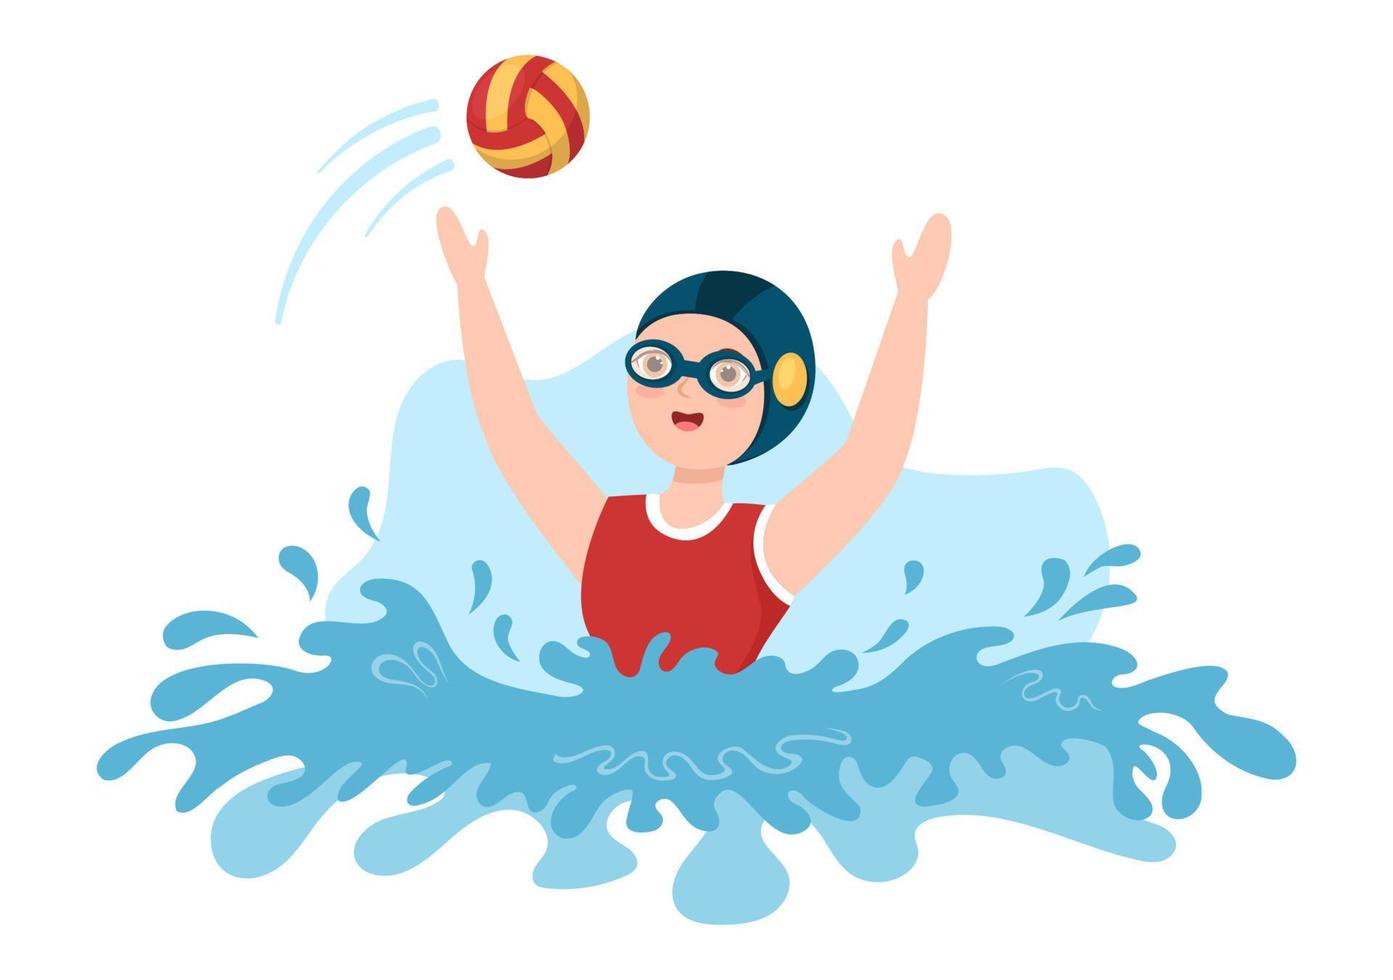 Water Polo Sport Player Playing to Throw the Ball on the Opponent's Goal in the Swimming Pool in Flat Cartoon Hand Drawn Templates Illustration vector